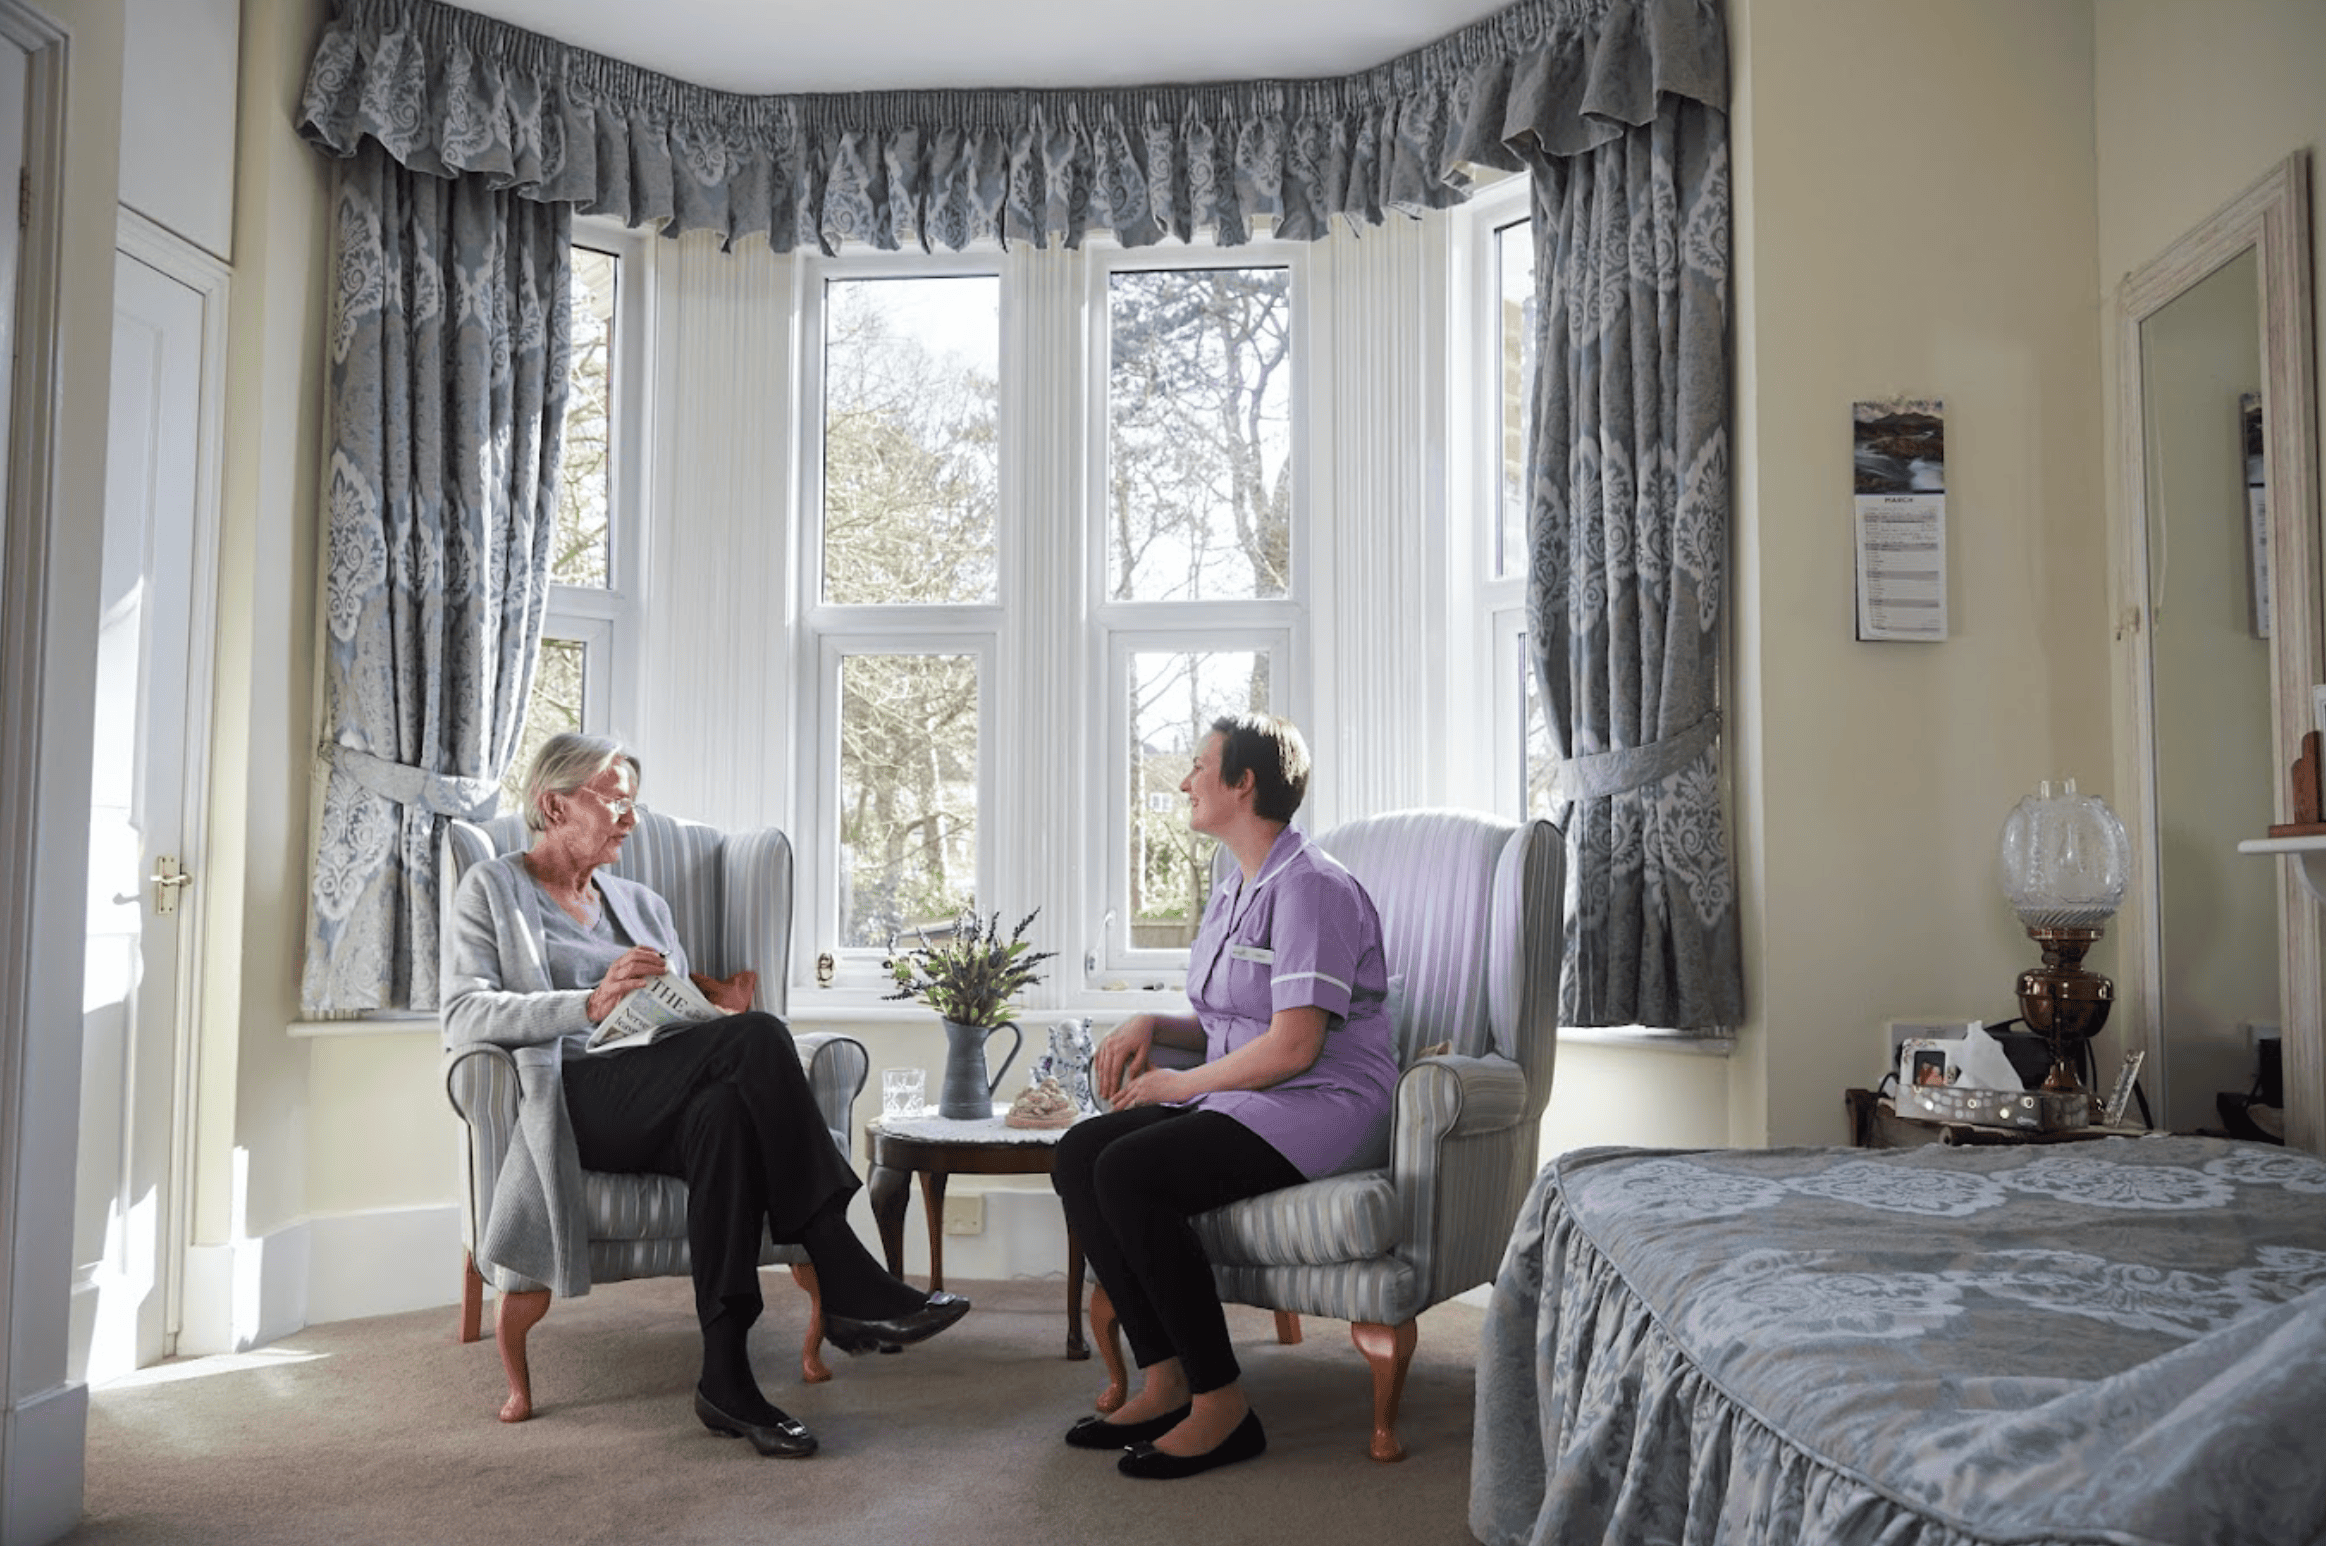 Bedroom of Priors Mead Care Home in Reigate, Surrey